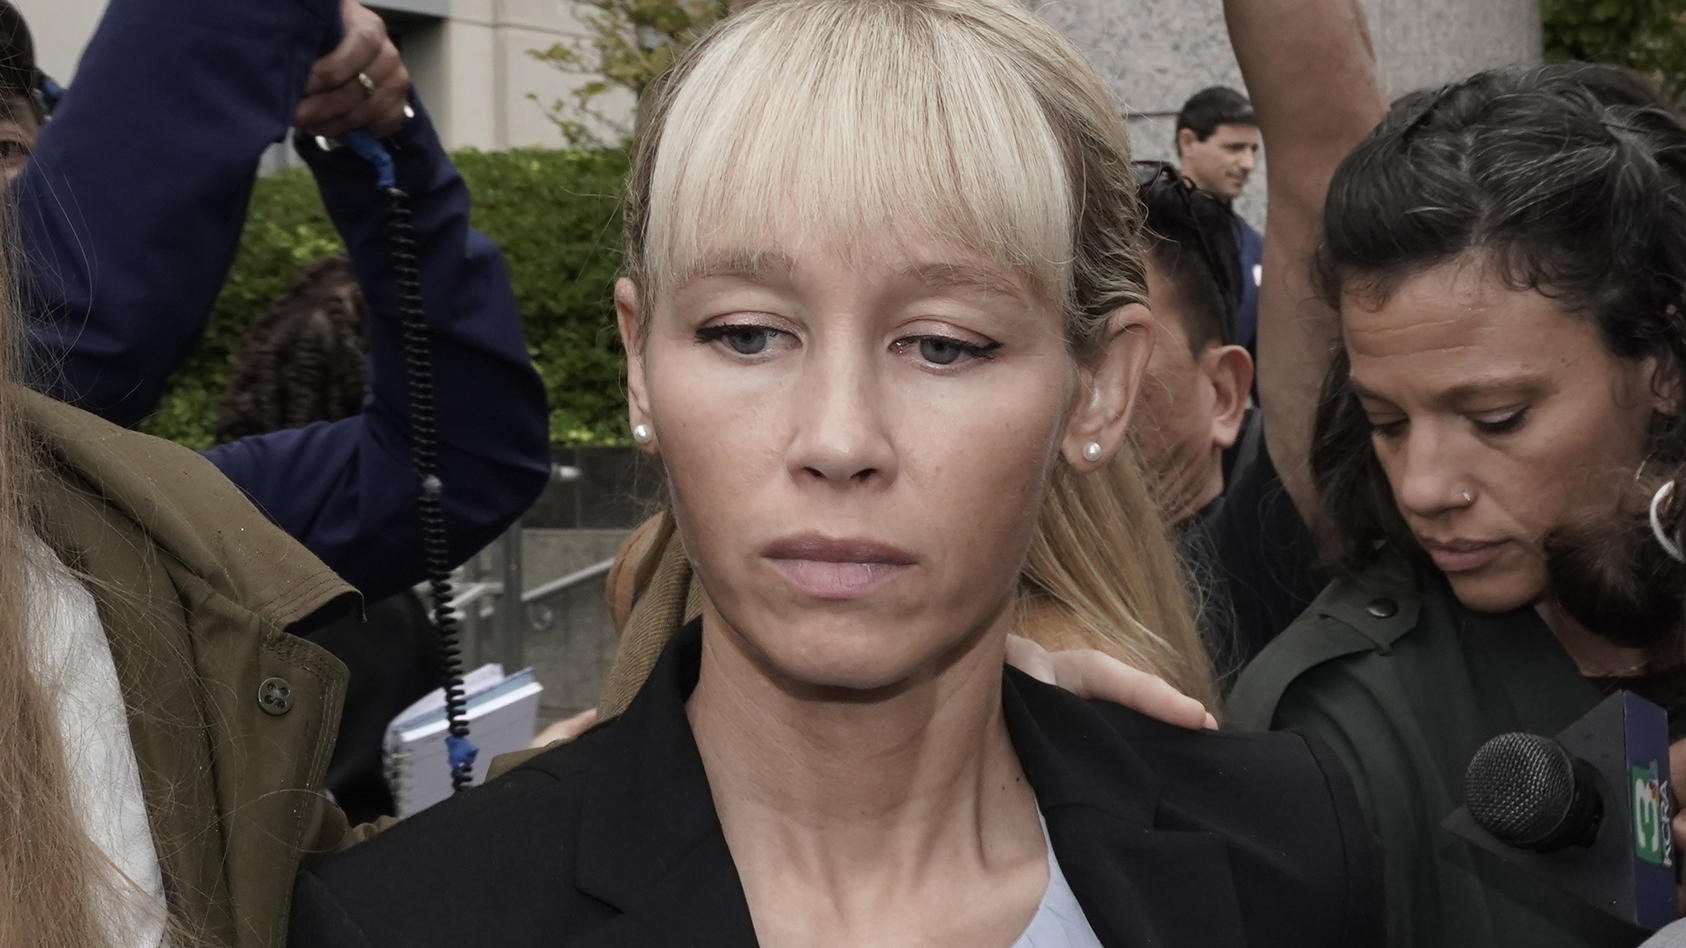 Sherri Papini leaves the federal courthouse after Federal Judge William Shubb sentenced her to 18 months in federal prison, in Sacramento, Calif., Monday, Sept. 19, 2022. Federal prosecutors had asked that she be sentenced to eight months in prison f